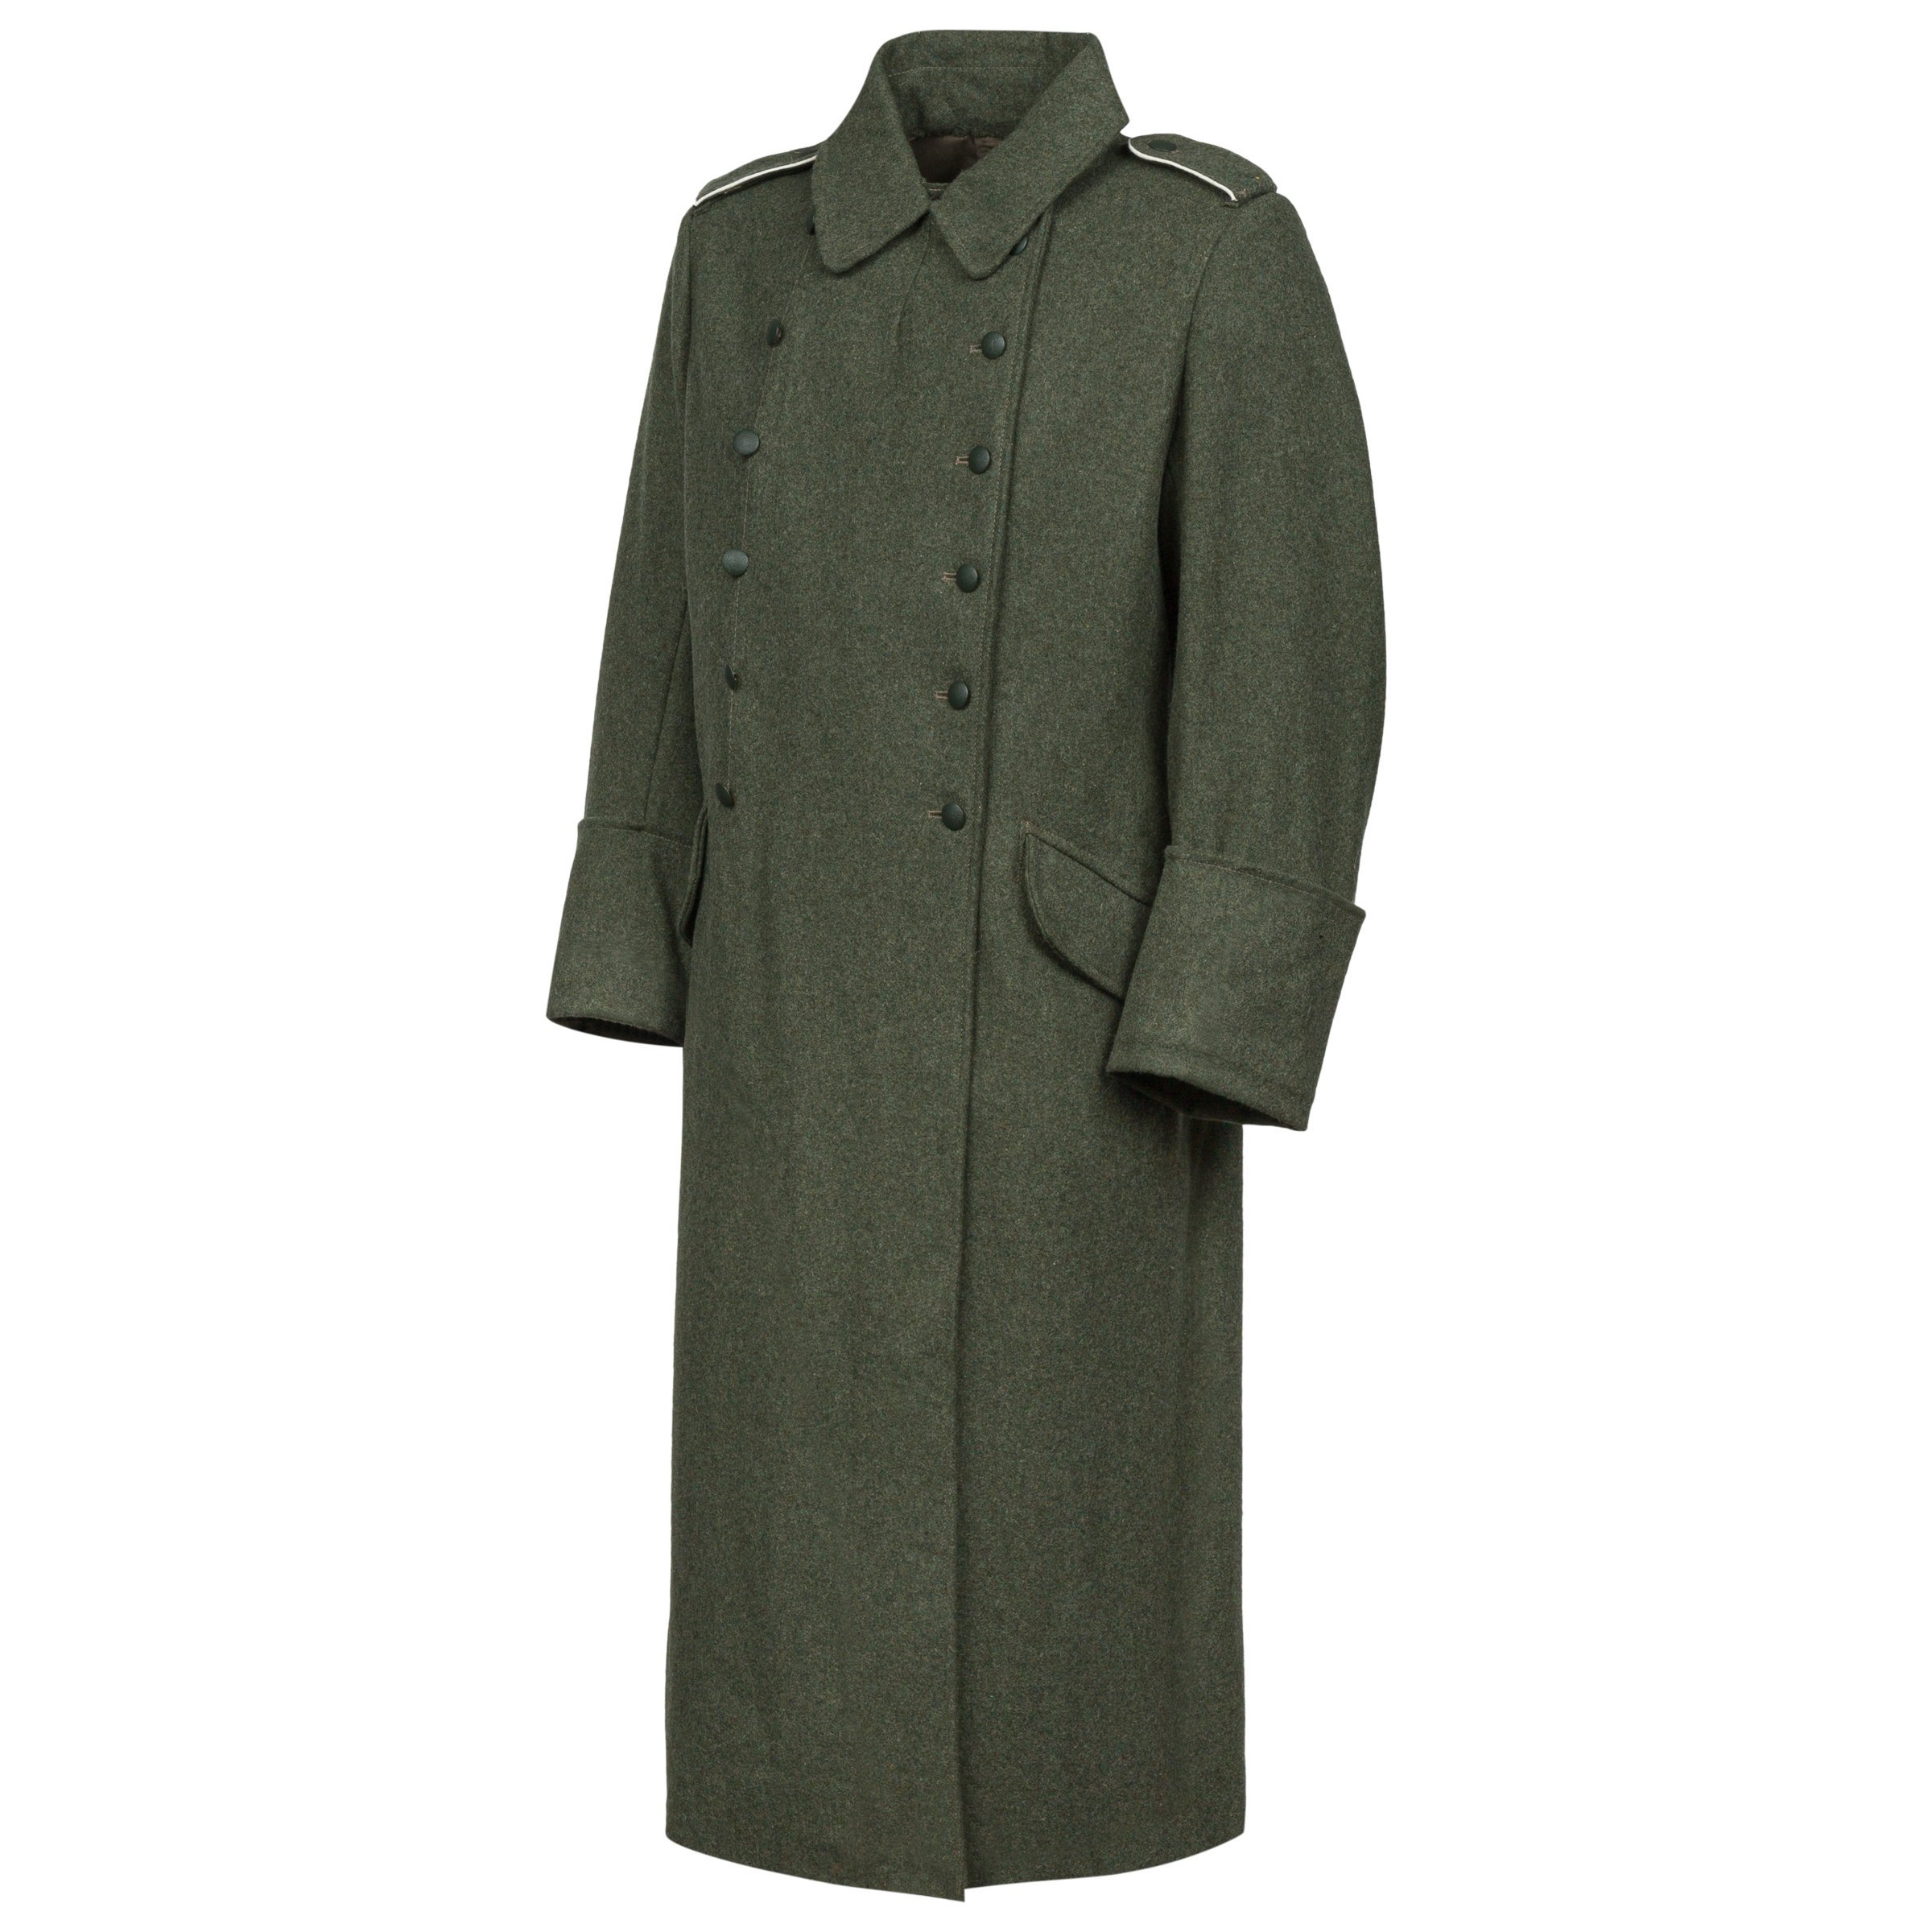 WH/SS M40 Greatcoat 50 184,75 € | Nestof.pl